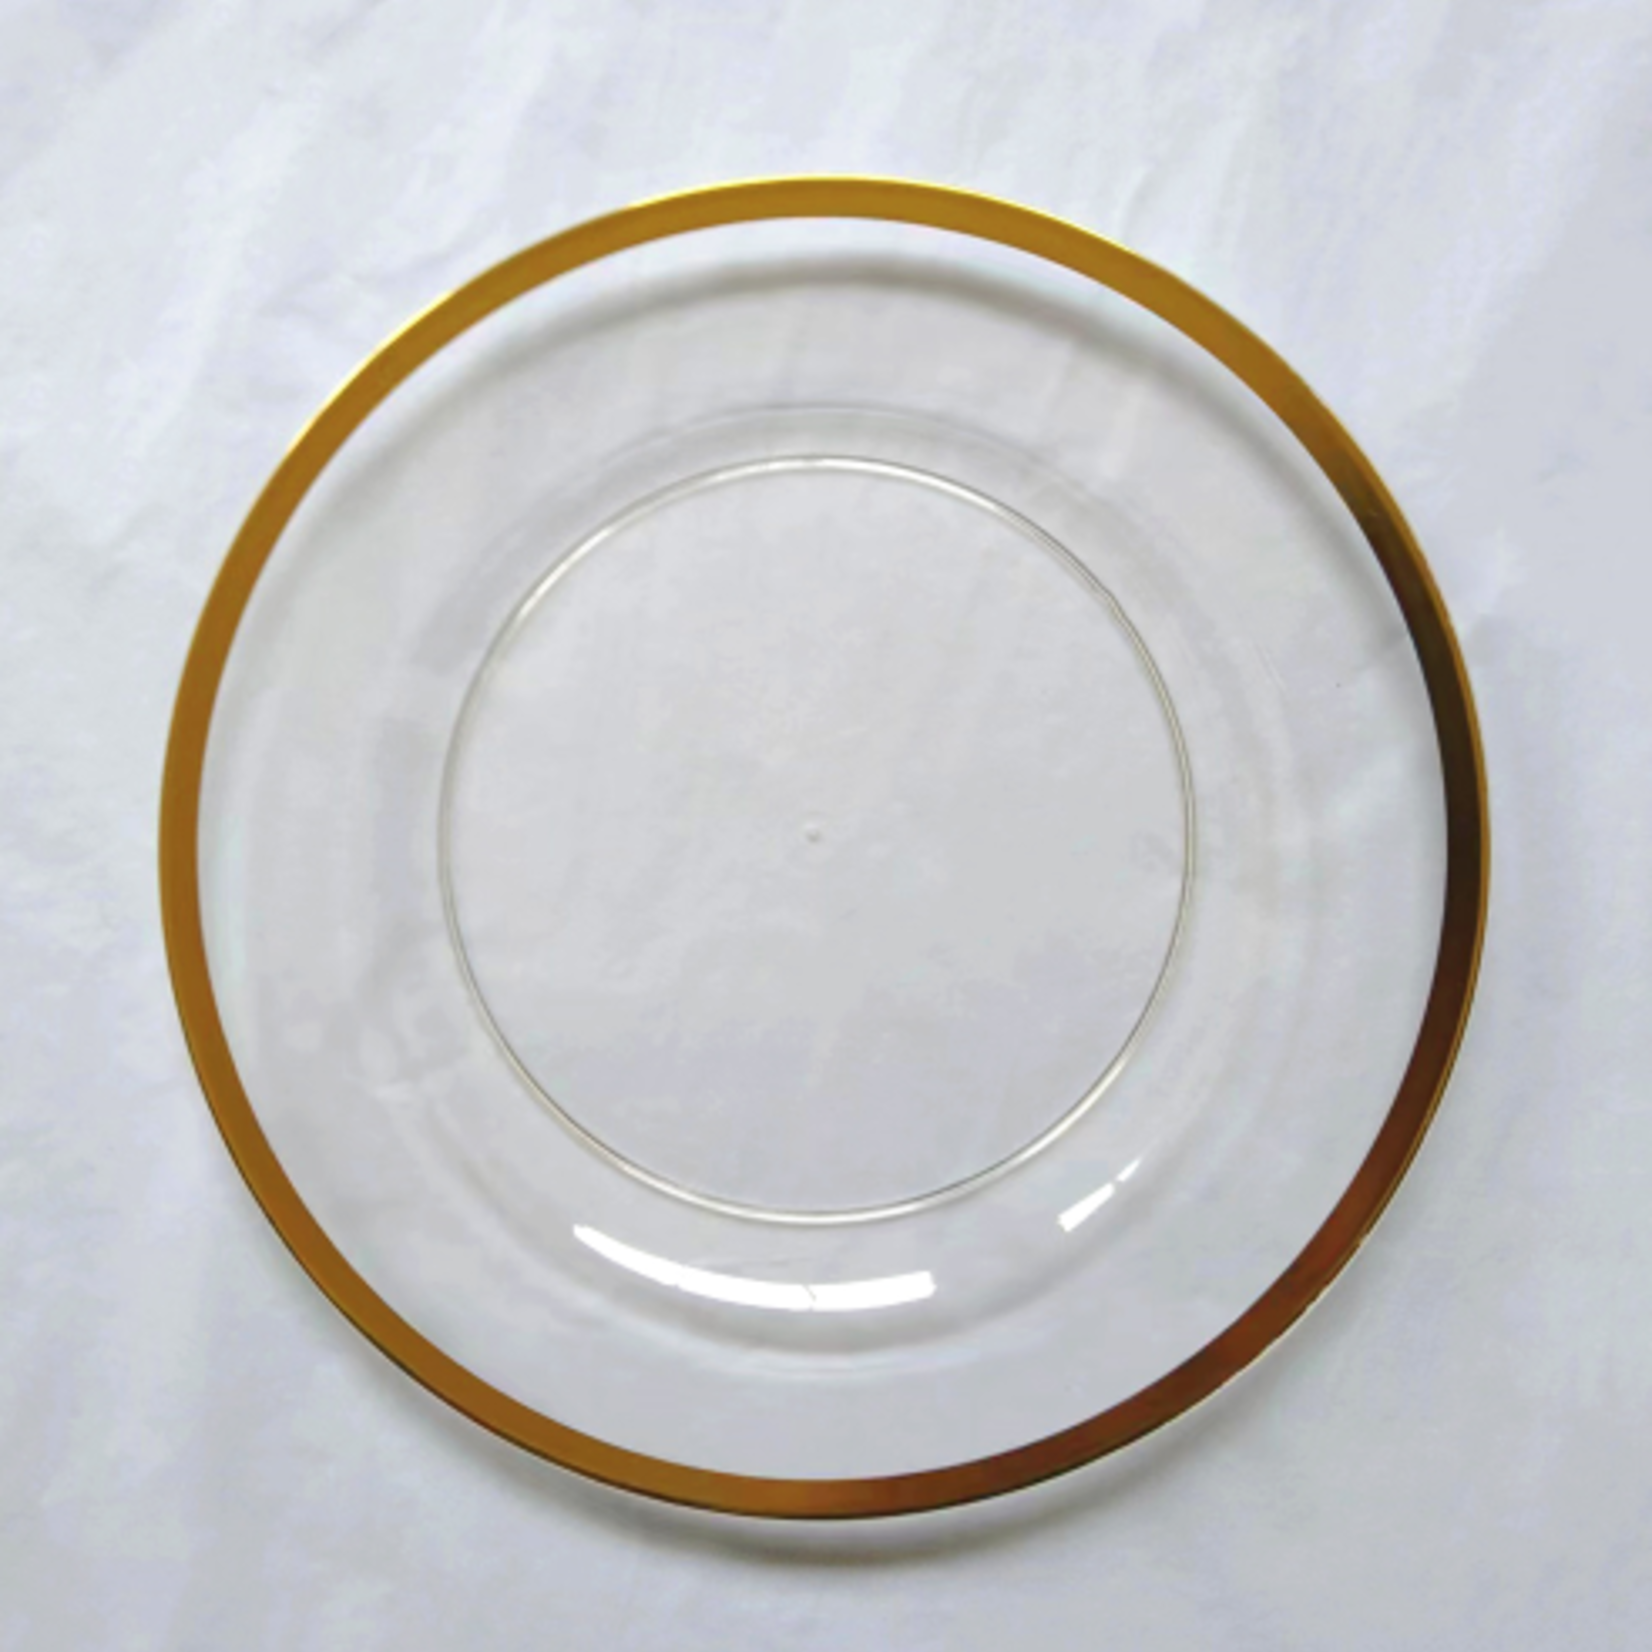 13" ROUND CLEAR CHARGER PLATE WITH GOLD EDGE PLASTIC